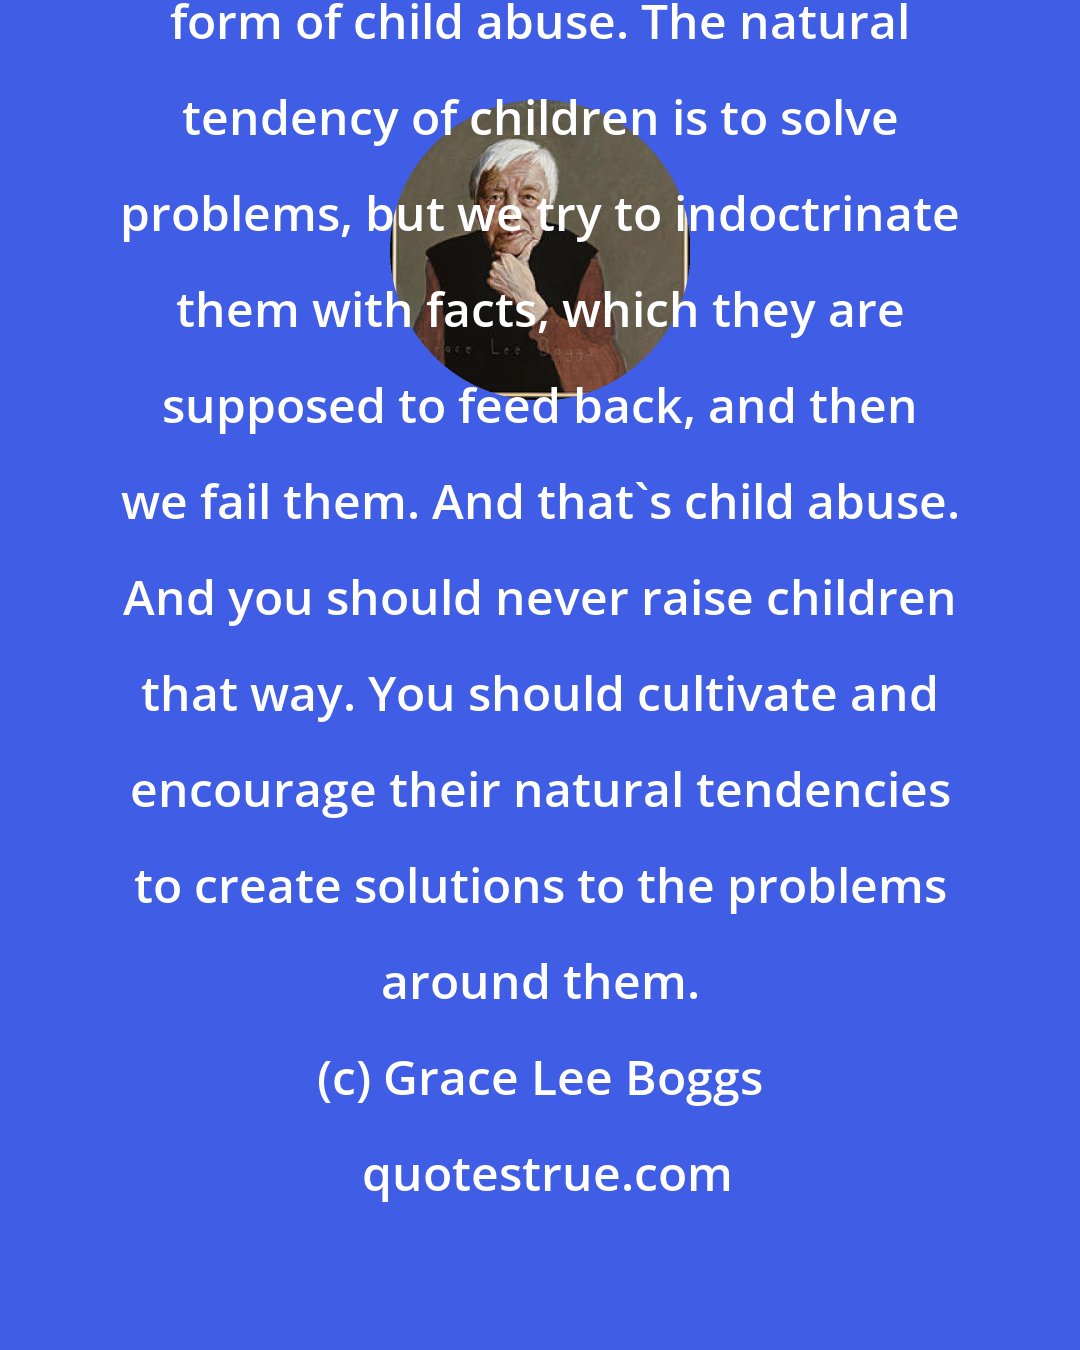 Grace Lee Boggs: I think that education today is a form of child abuse. The natural tendency of children is to solve problems, but we try to indoctrinate them with facts, which they are supposed to feed back, and then we fail them. And that's child abuse. And you should never raise children that way. You should cultivate and encourage their natural tendencies to create solutions to the problems around them.